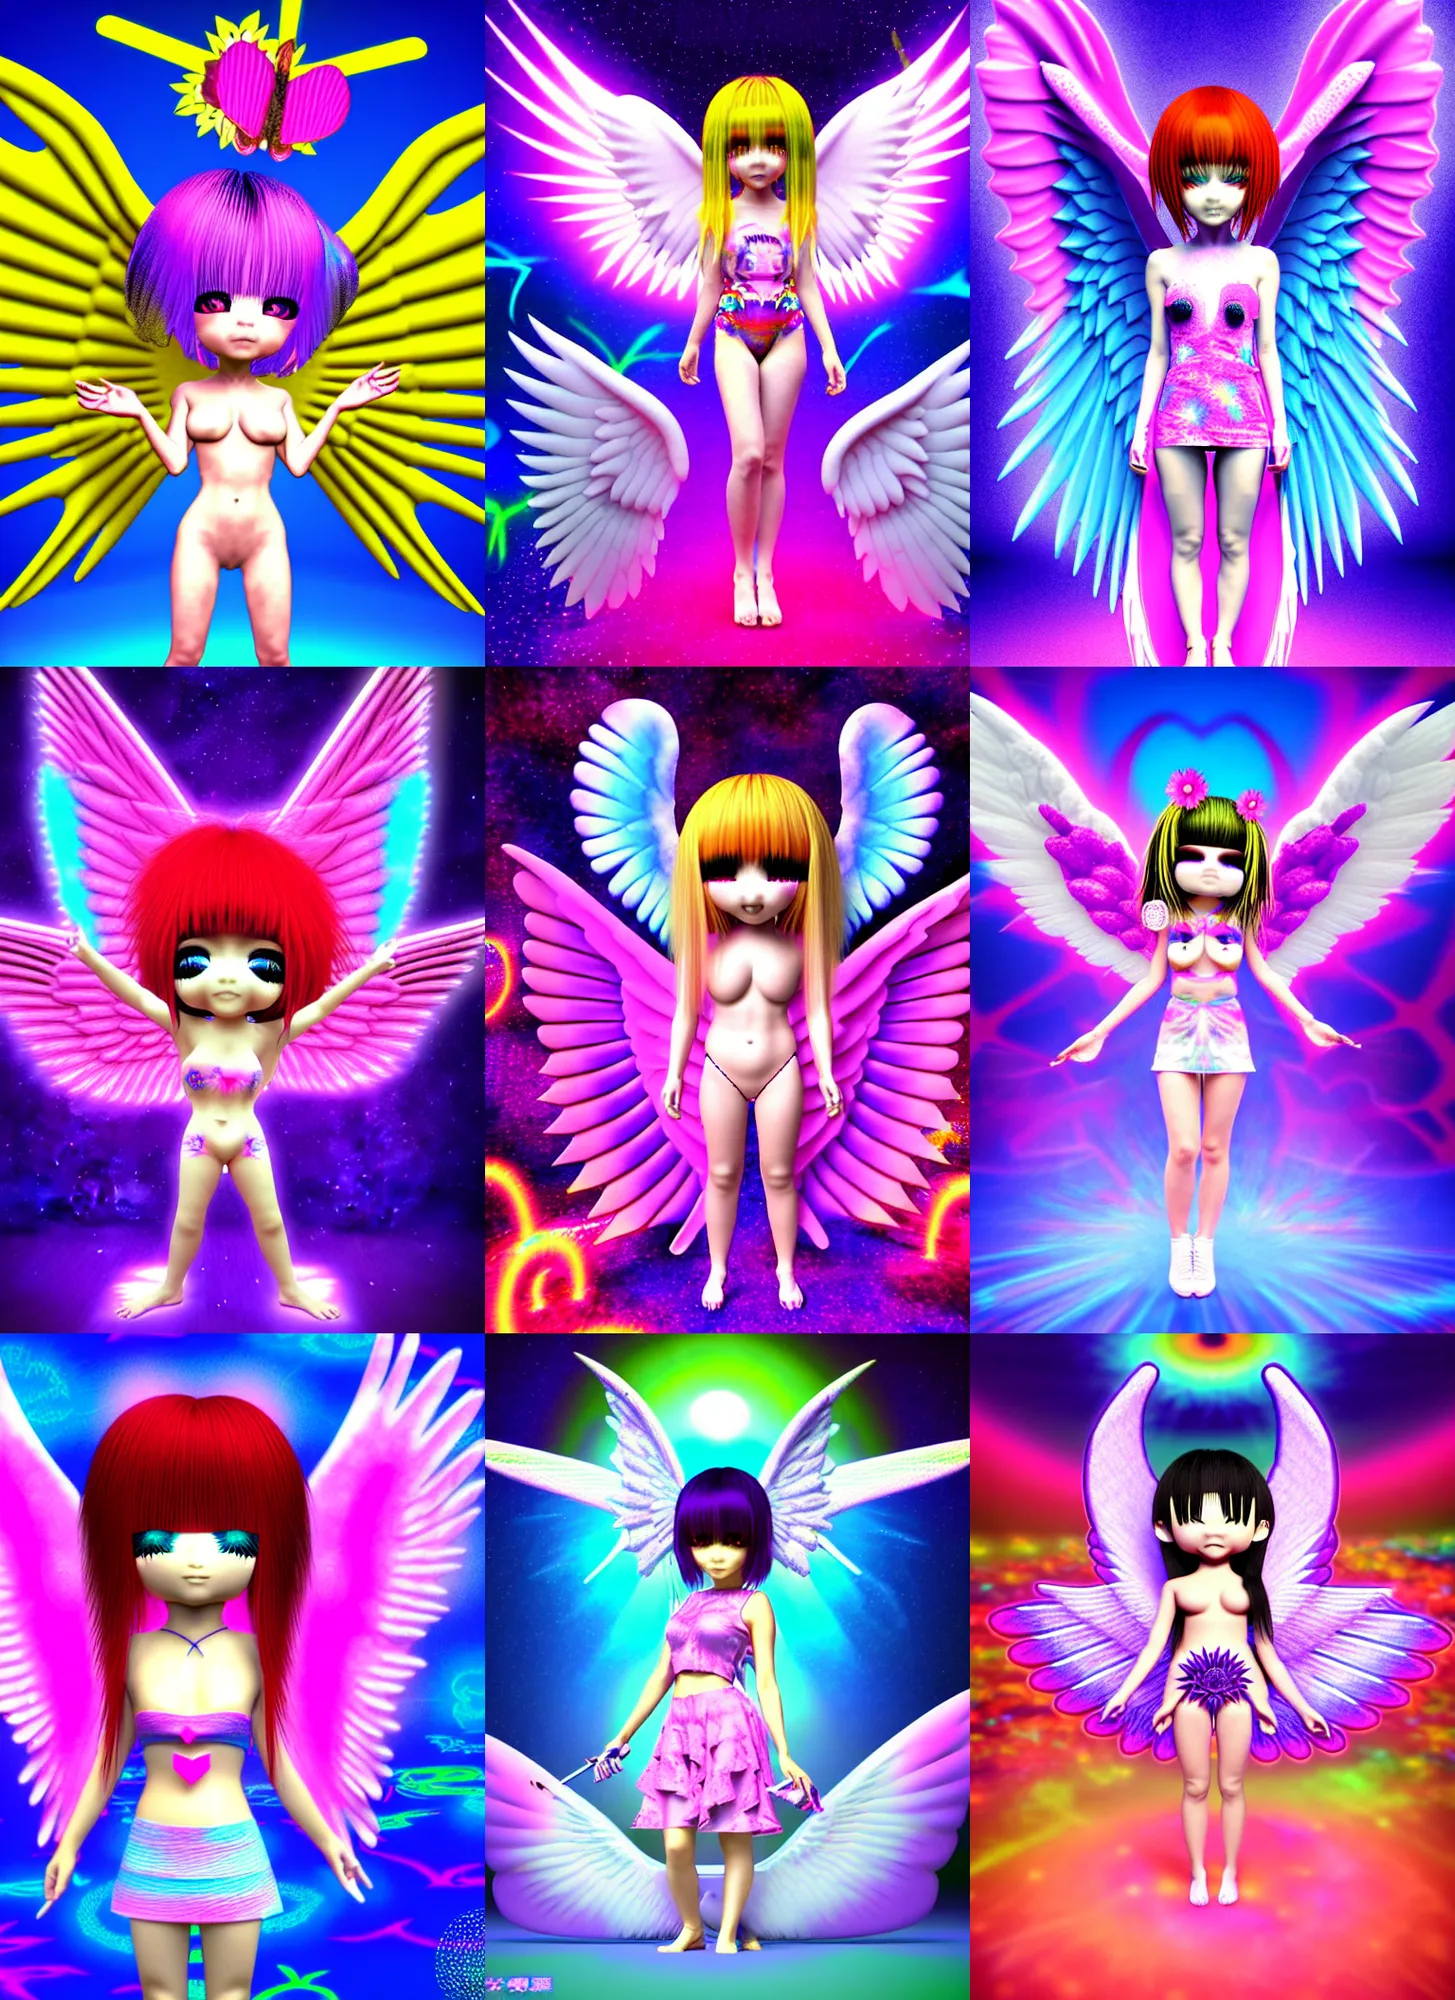 Prompt: 3d render of chibi Sega Nightmaren Nightmaren Nightmaren wearing angel wings by Ichiro Tanida wearing a cockscomb against a psychedelic swirly background with 3d butterflies and 3d flowers n the style of 1990's CG graphics 3d rendered y2K aesthetic by Ichiro Tanida, 3DO magazine